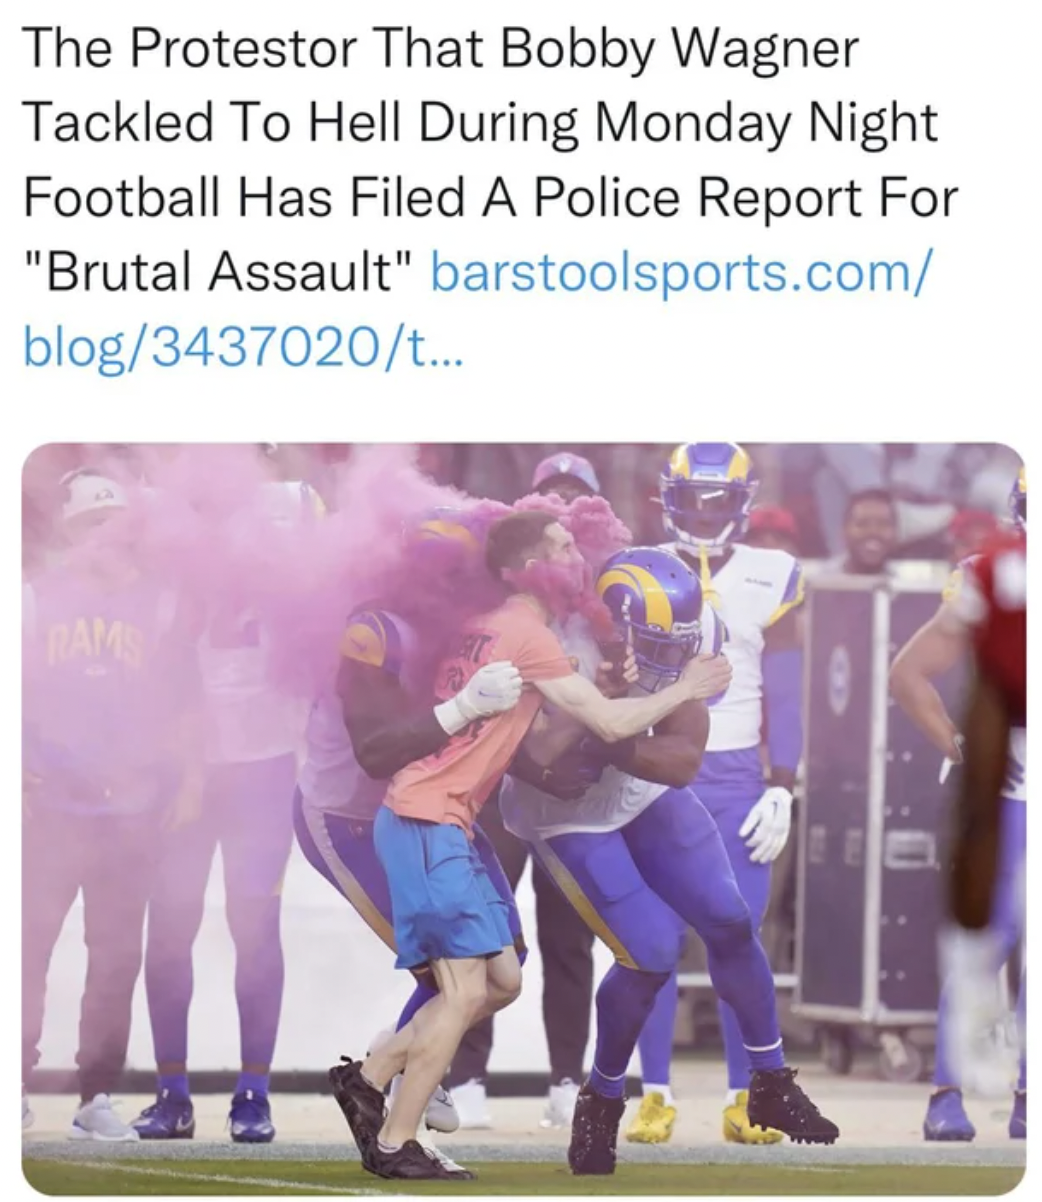 Fails and facepalms - NFL - The Protestor That Bobby Wagner Tackled To Hell During Monday Night Football Has Filed A Police Report For